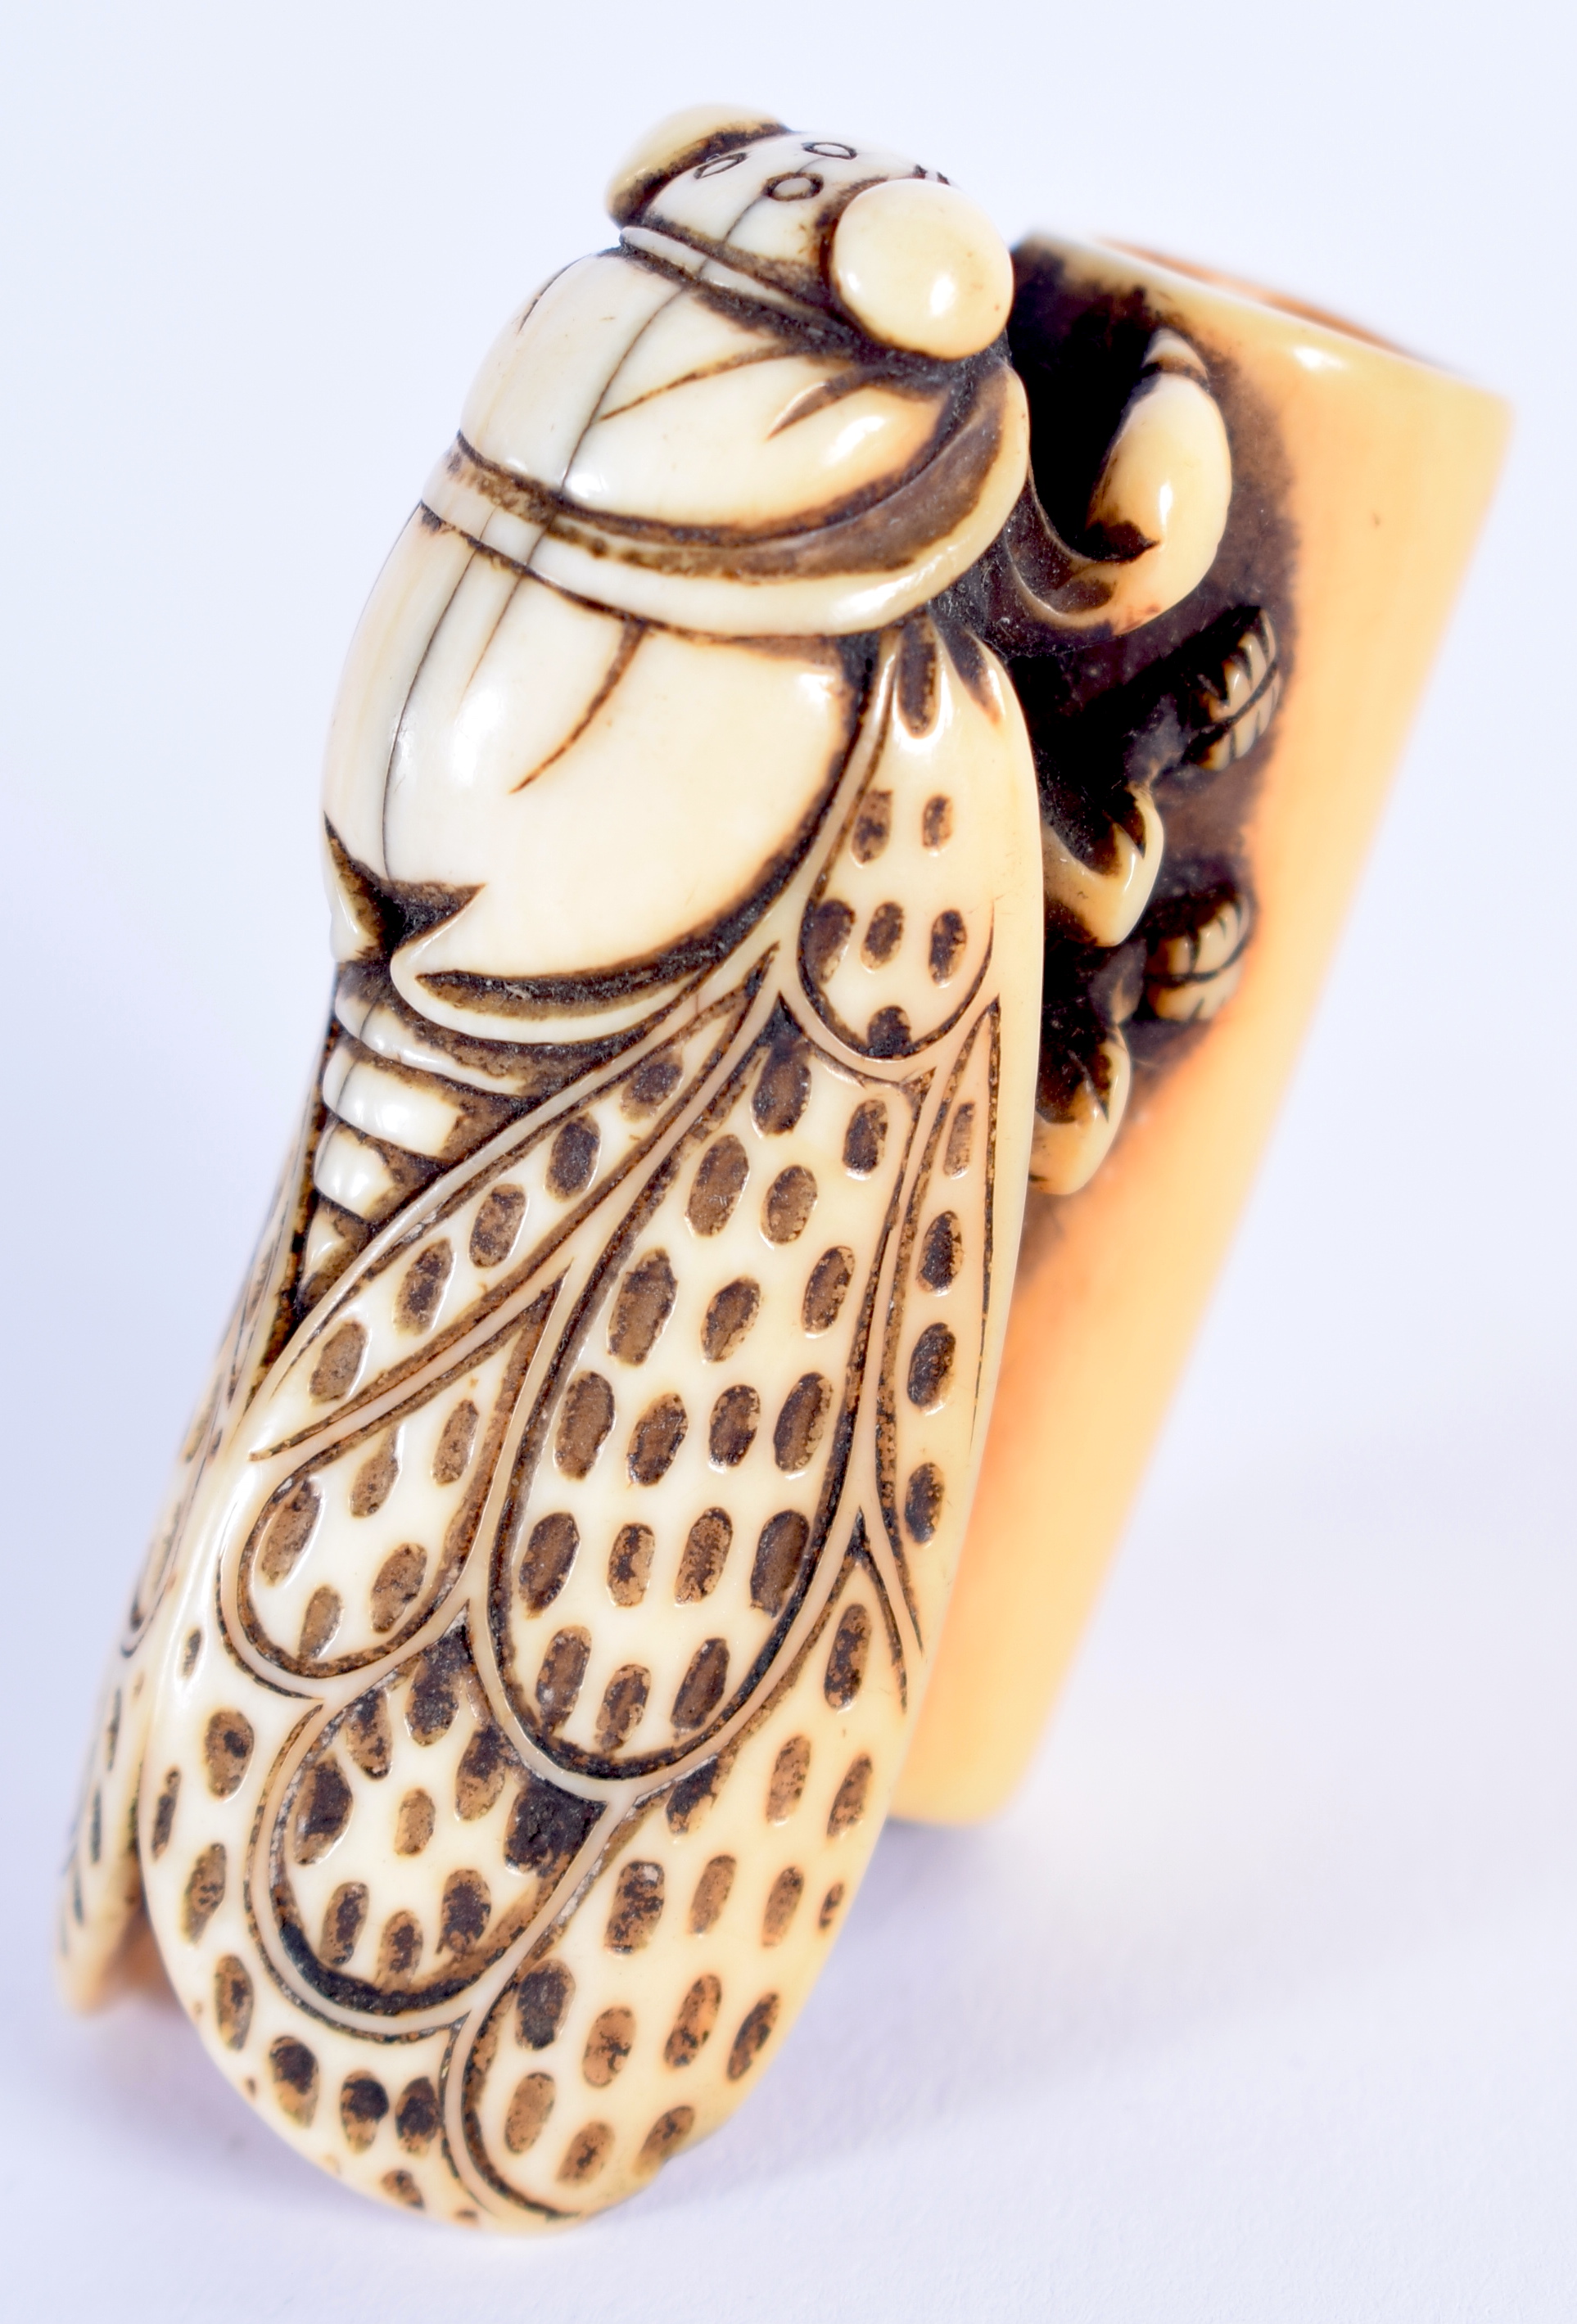 A LOVELY 18TH CENTURY JAPANESE MEIJI PERIOD CARVED IVORY NETSUKE modelled as a fly. 4.5 cm x 2.5 cm.